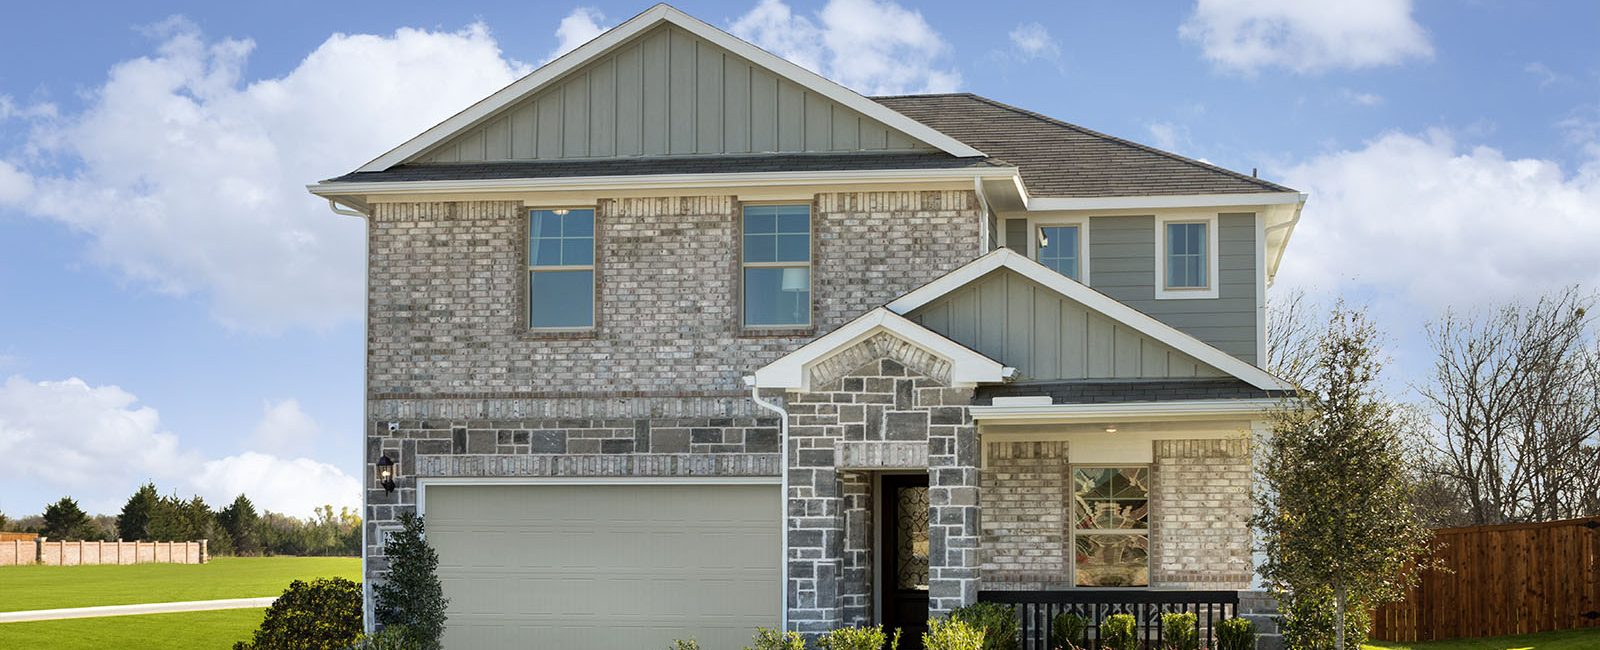 Parkside Village South by Meritage Homes 3